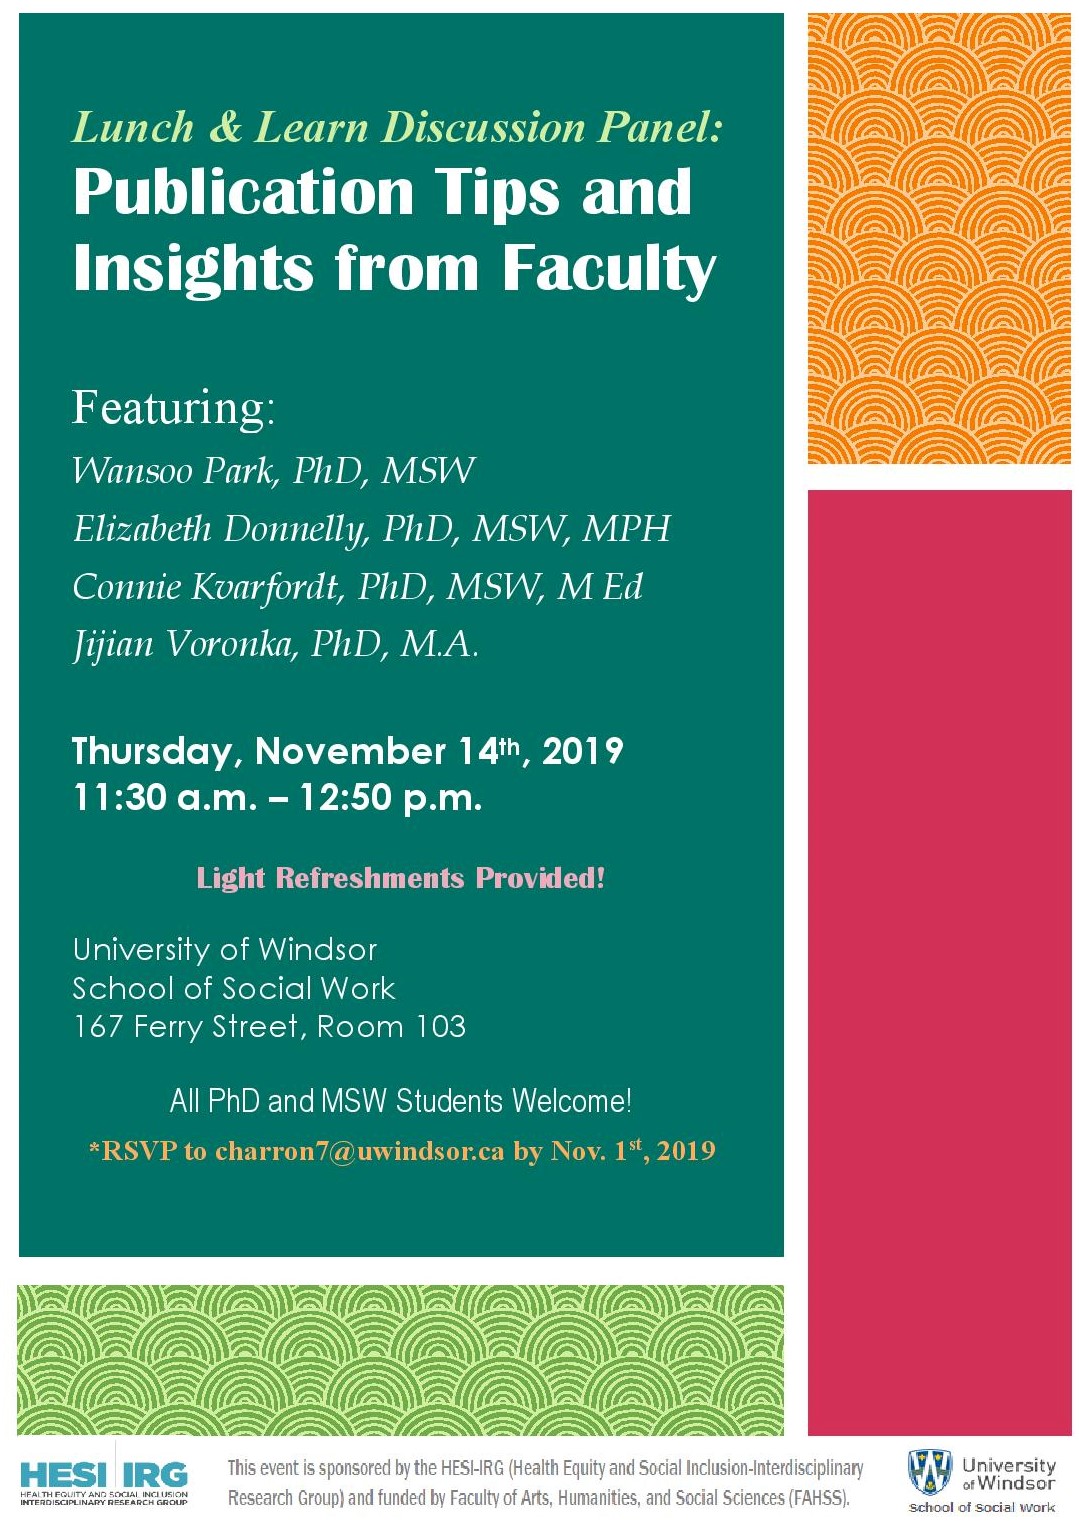 Poster of Publication Tips and Insights from Faculty Event